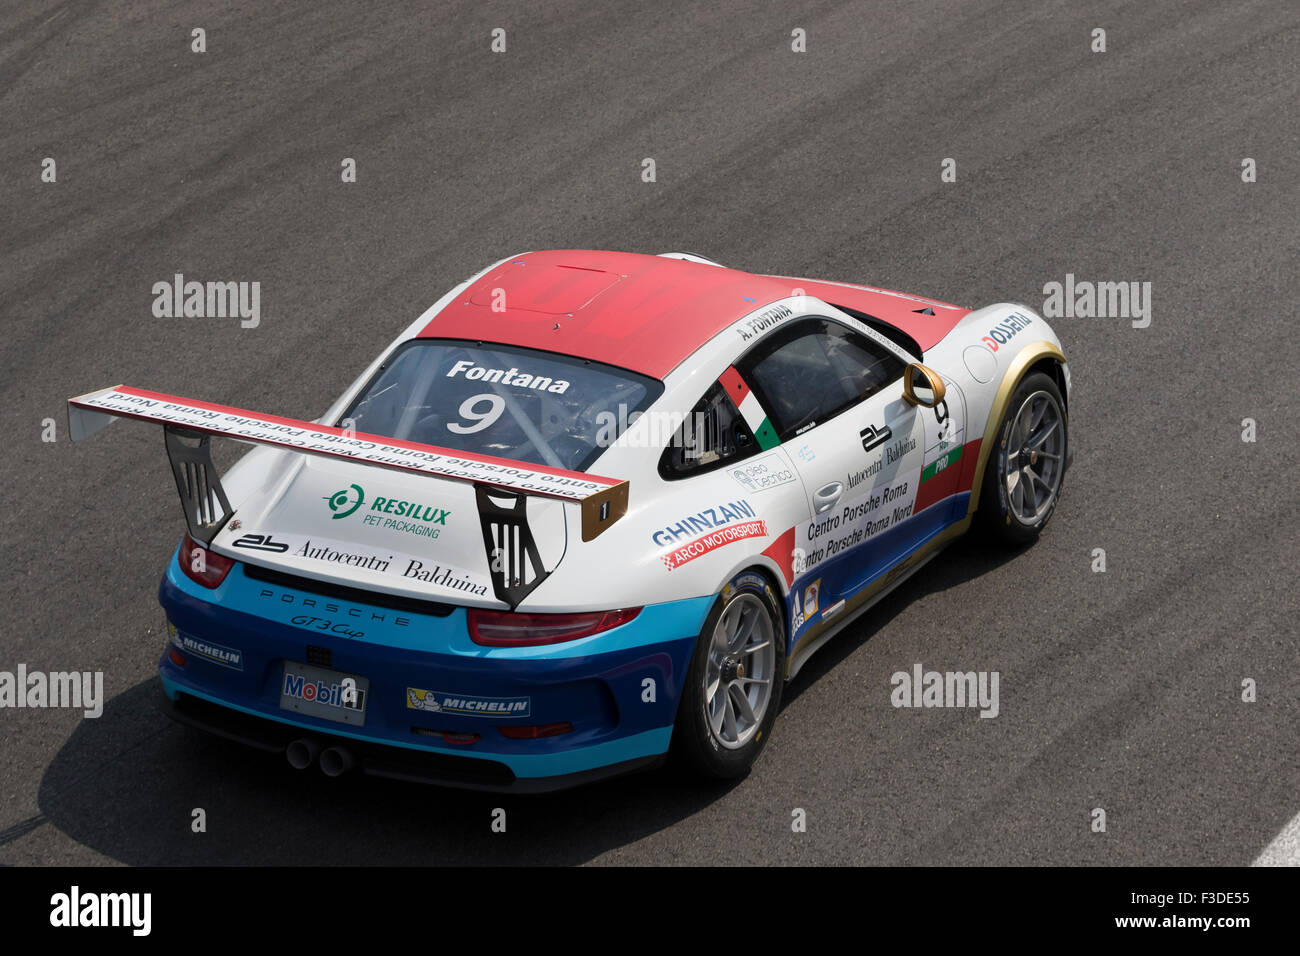 Monza, Italy - May 30, 2015: Porsche 911 GT3 Cup of Ghinzani Arco Motorsport team, driven  by Andrea Fontana Stock Photo